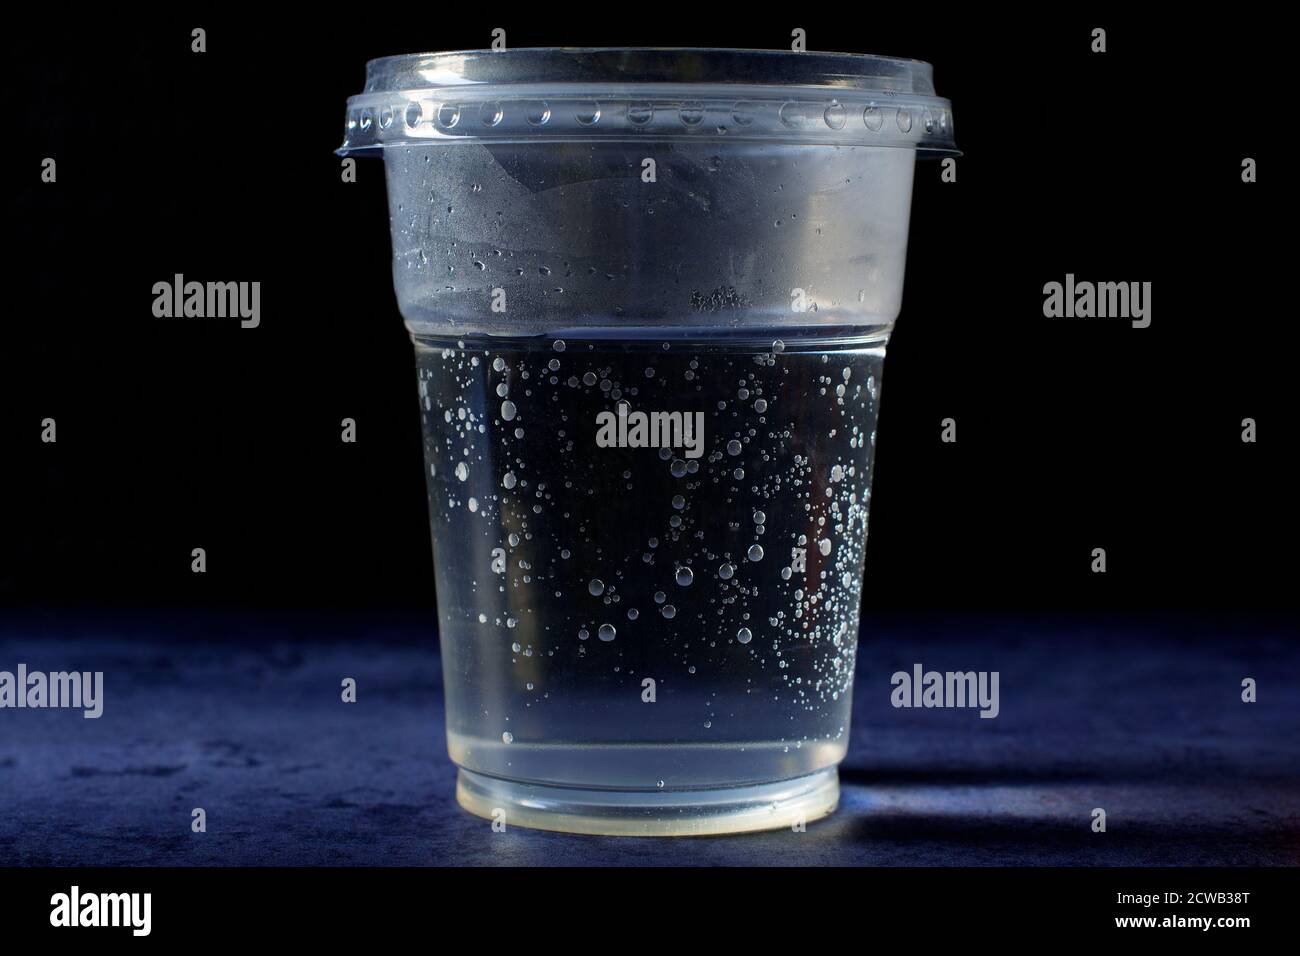 A plastic cup of fresh, cold tap water, full of air bubbles. The cup has a plastic lid on it and it is standing on deep blue background. Stock Photo